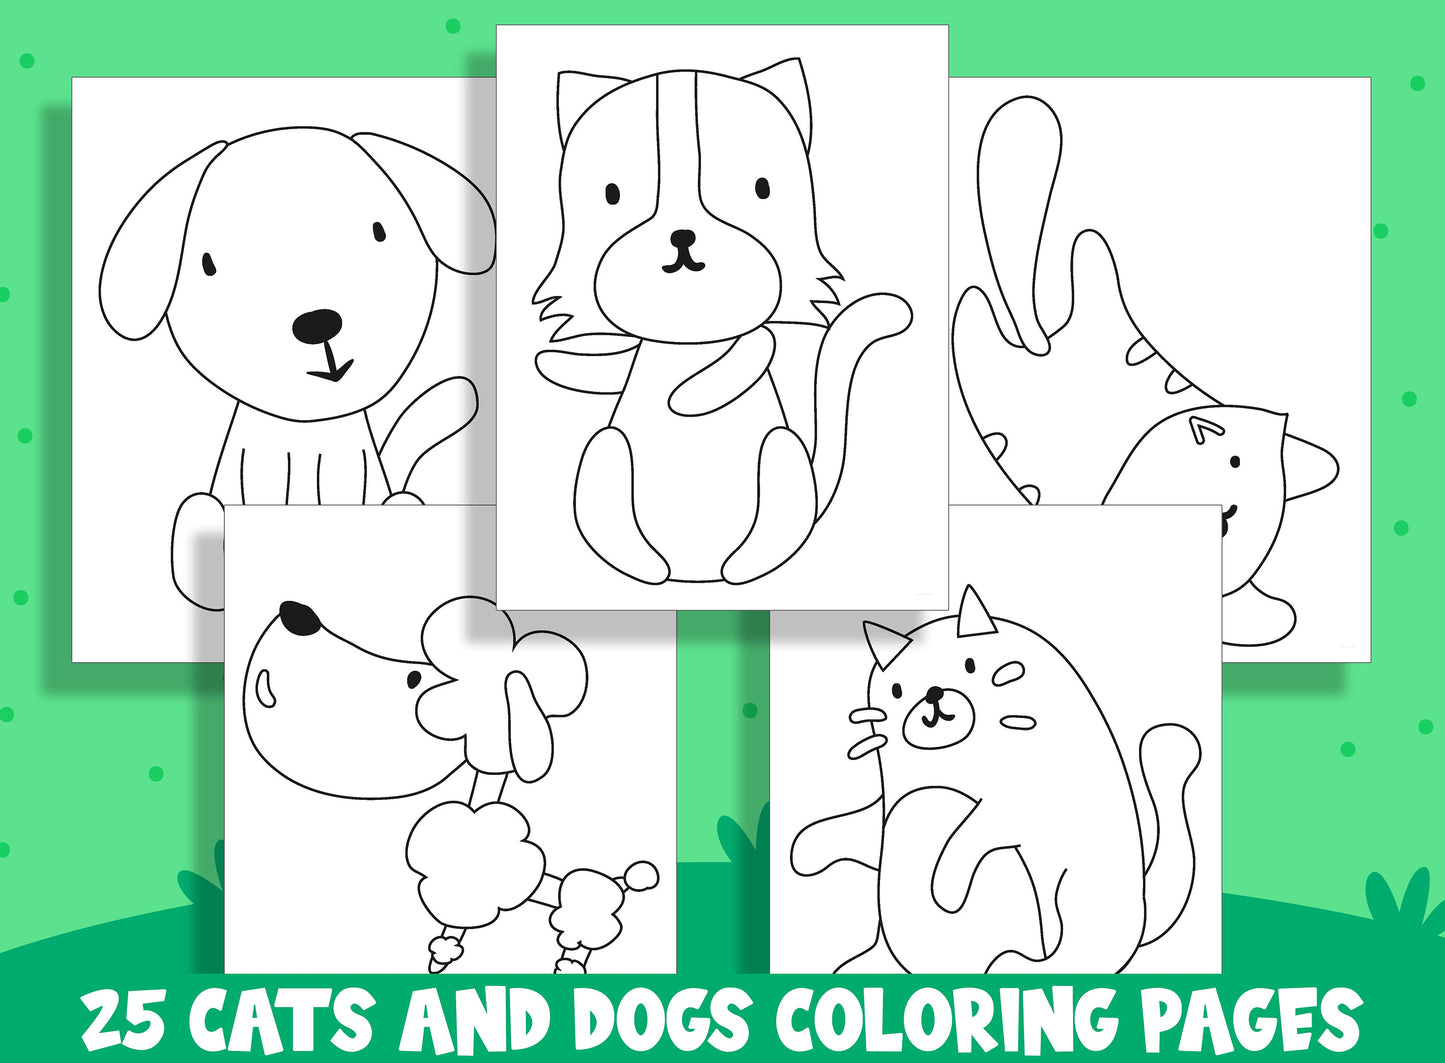 Fun & Adorable Coloring Pages of Cats and Dogs: 25 Perfectly Designed Sheets for Preschool and Kindergarten Kids, PDF File, Instant Download